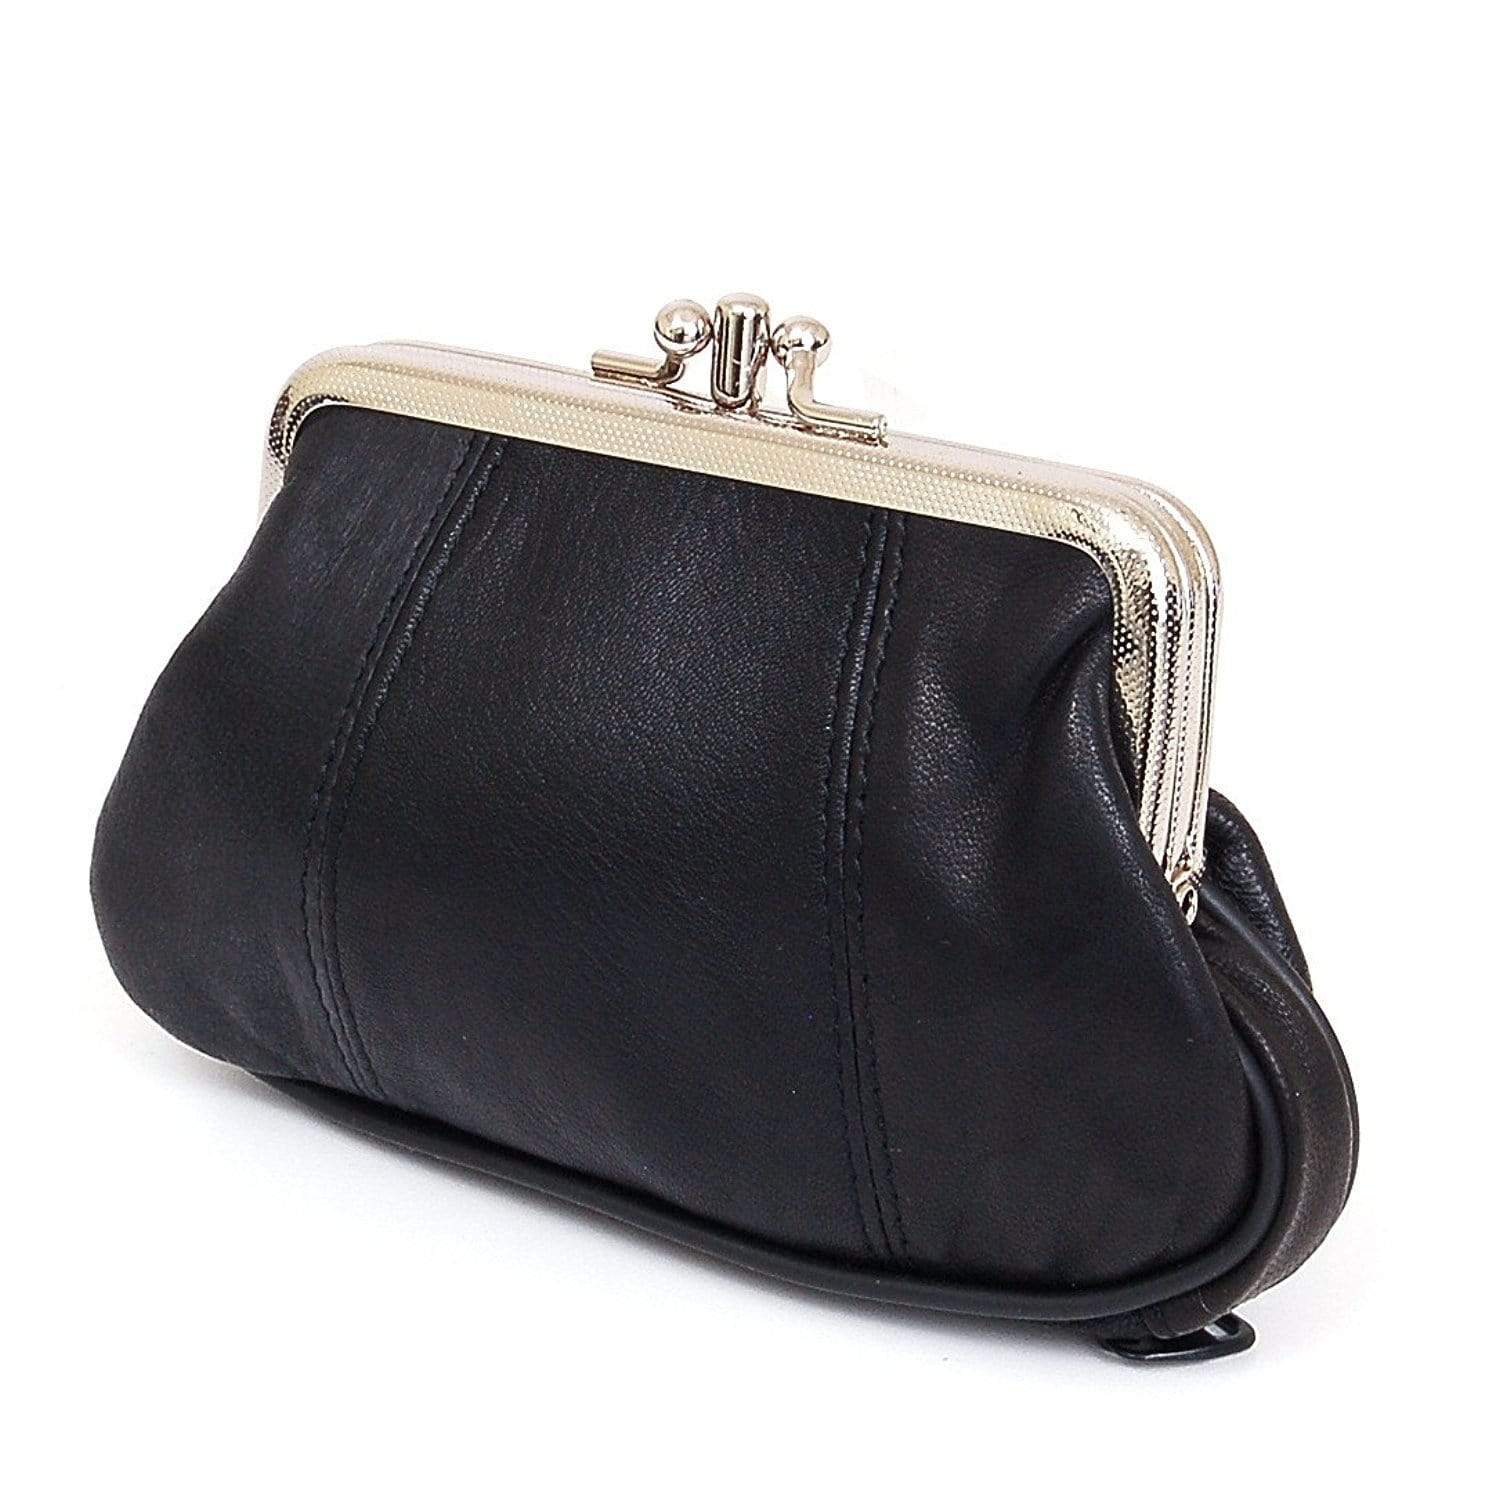 Improving lifestyles Leather Mini Wallet Coin Purse with Dual Closures and Zipper Pocket